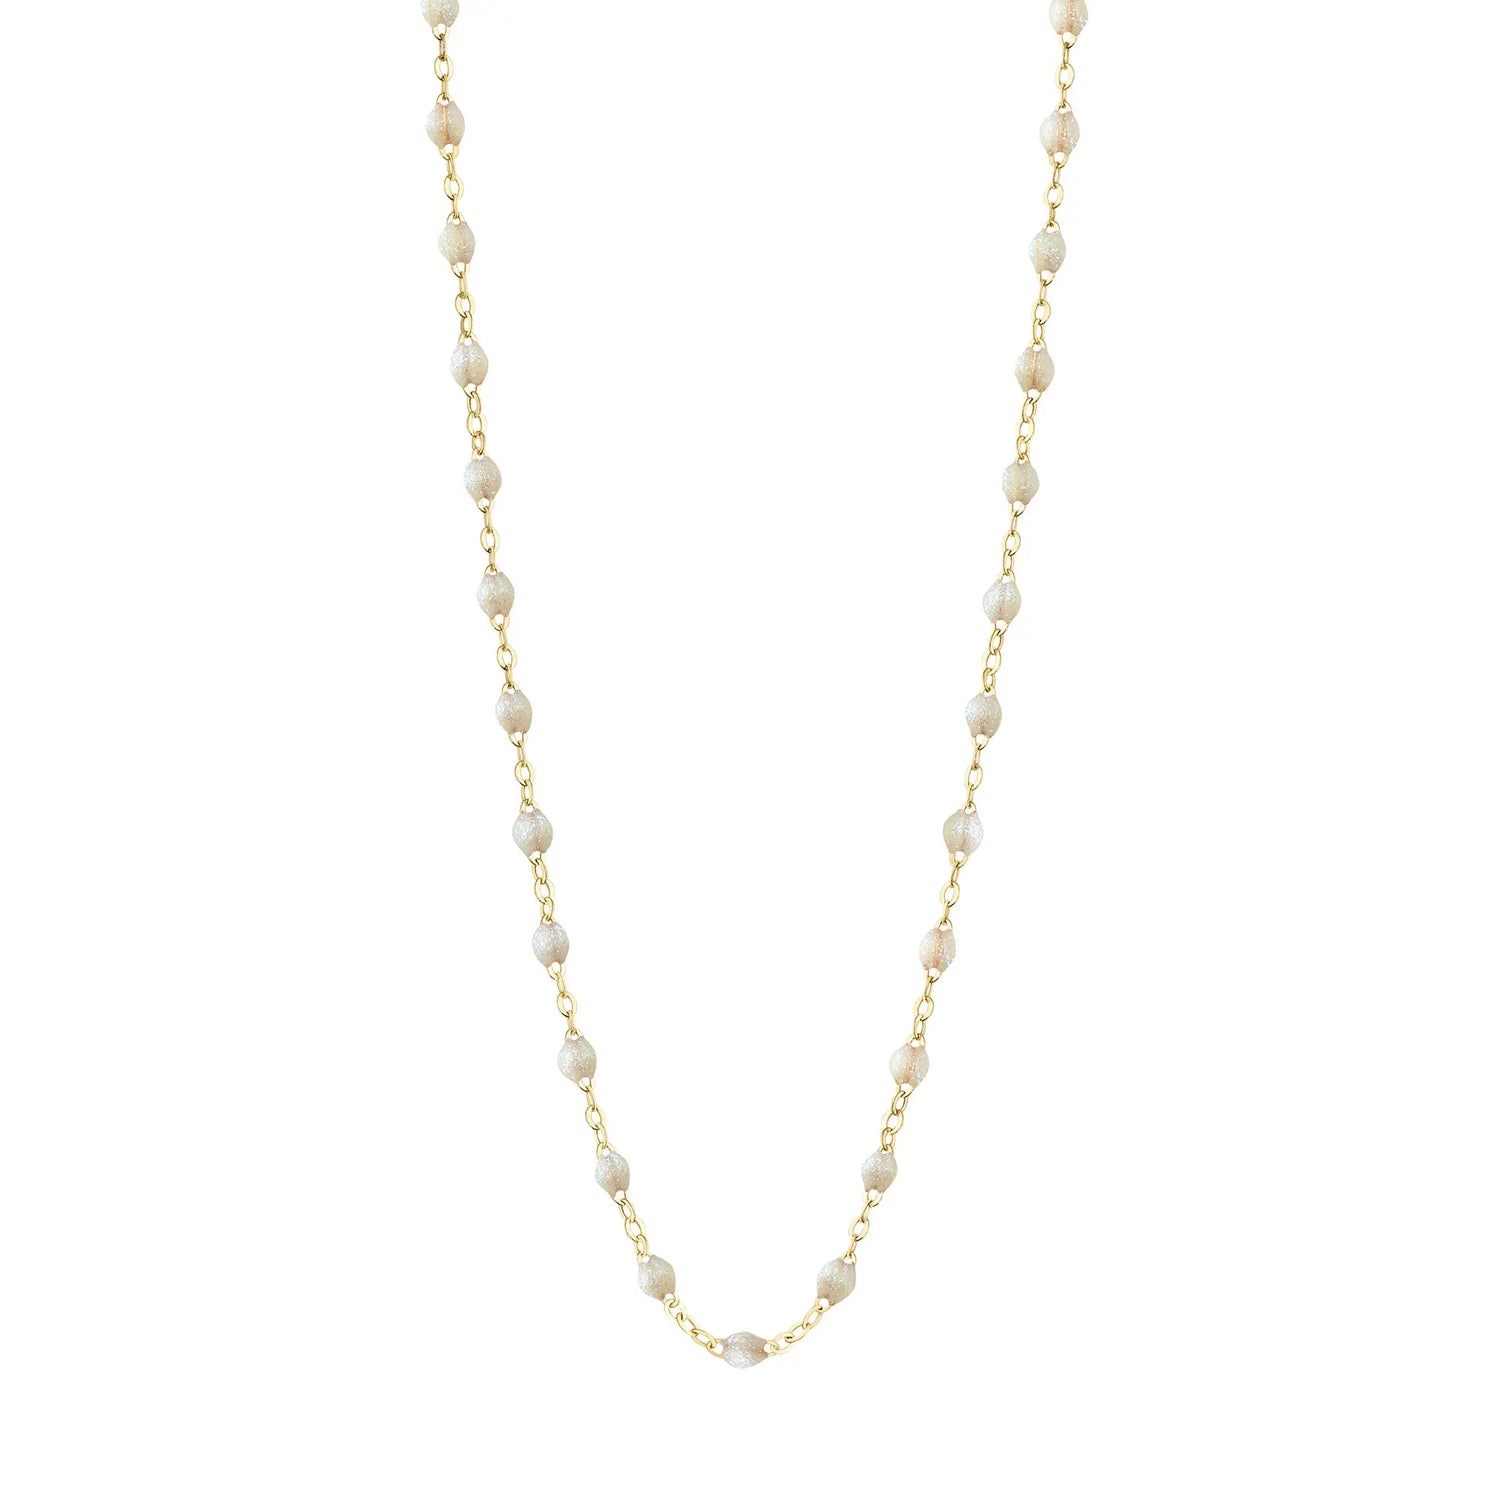 Stack you necklace layers with this versatile beaded chain! The Classic Gigi Necklace by gigi CLOZEAU features 18 carat yellow gold, and striking Opal resin jewels for an everyday effortless appearance. Handcrafted in 18k yellow gold. The beads measure 1.50mm in diameter and is finished with a spring ring clasp. The length is 16.5 inches.